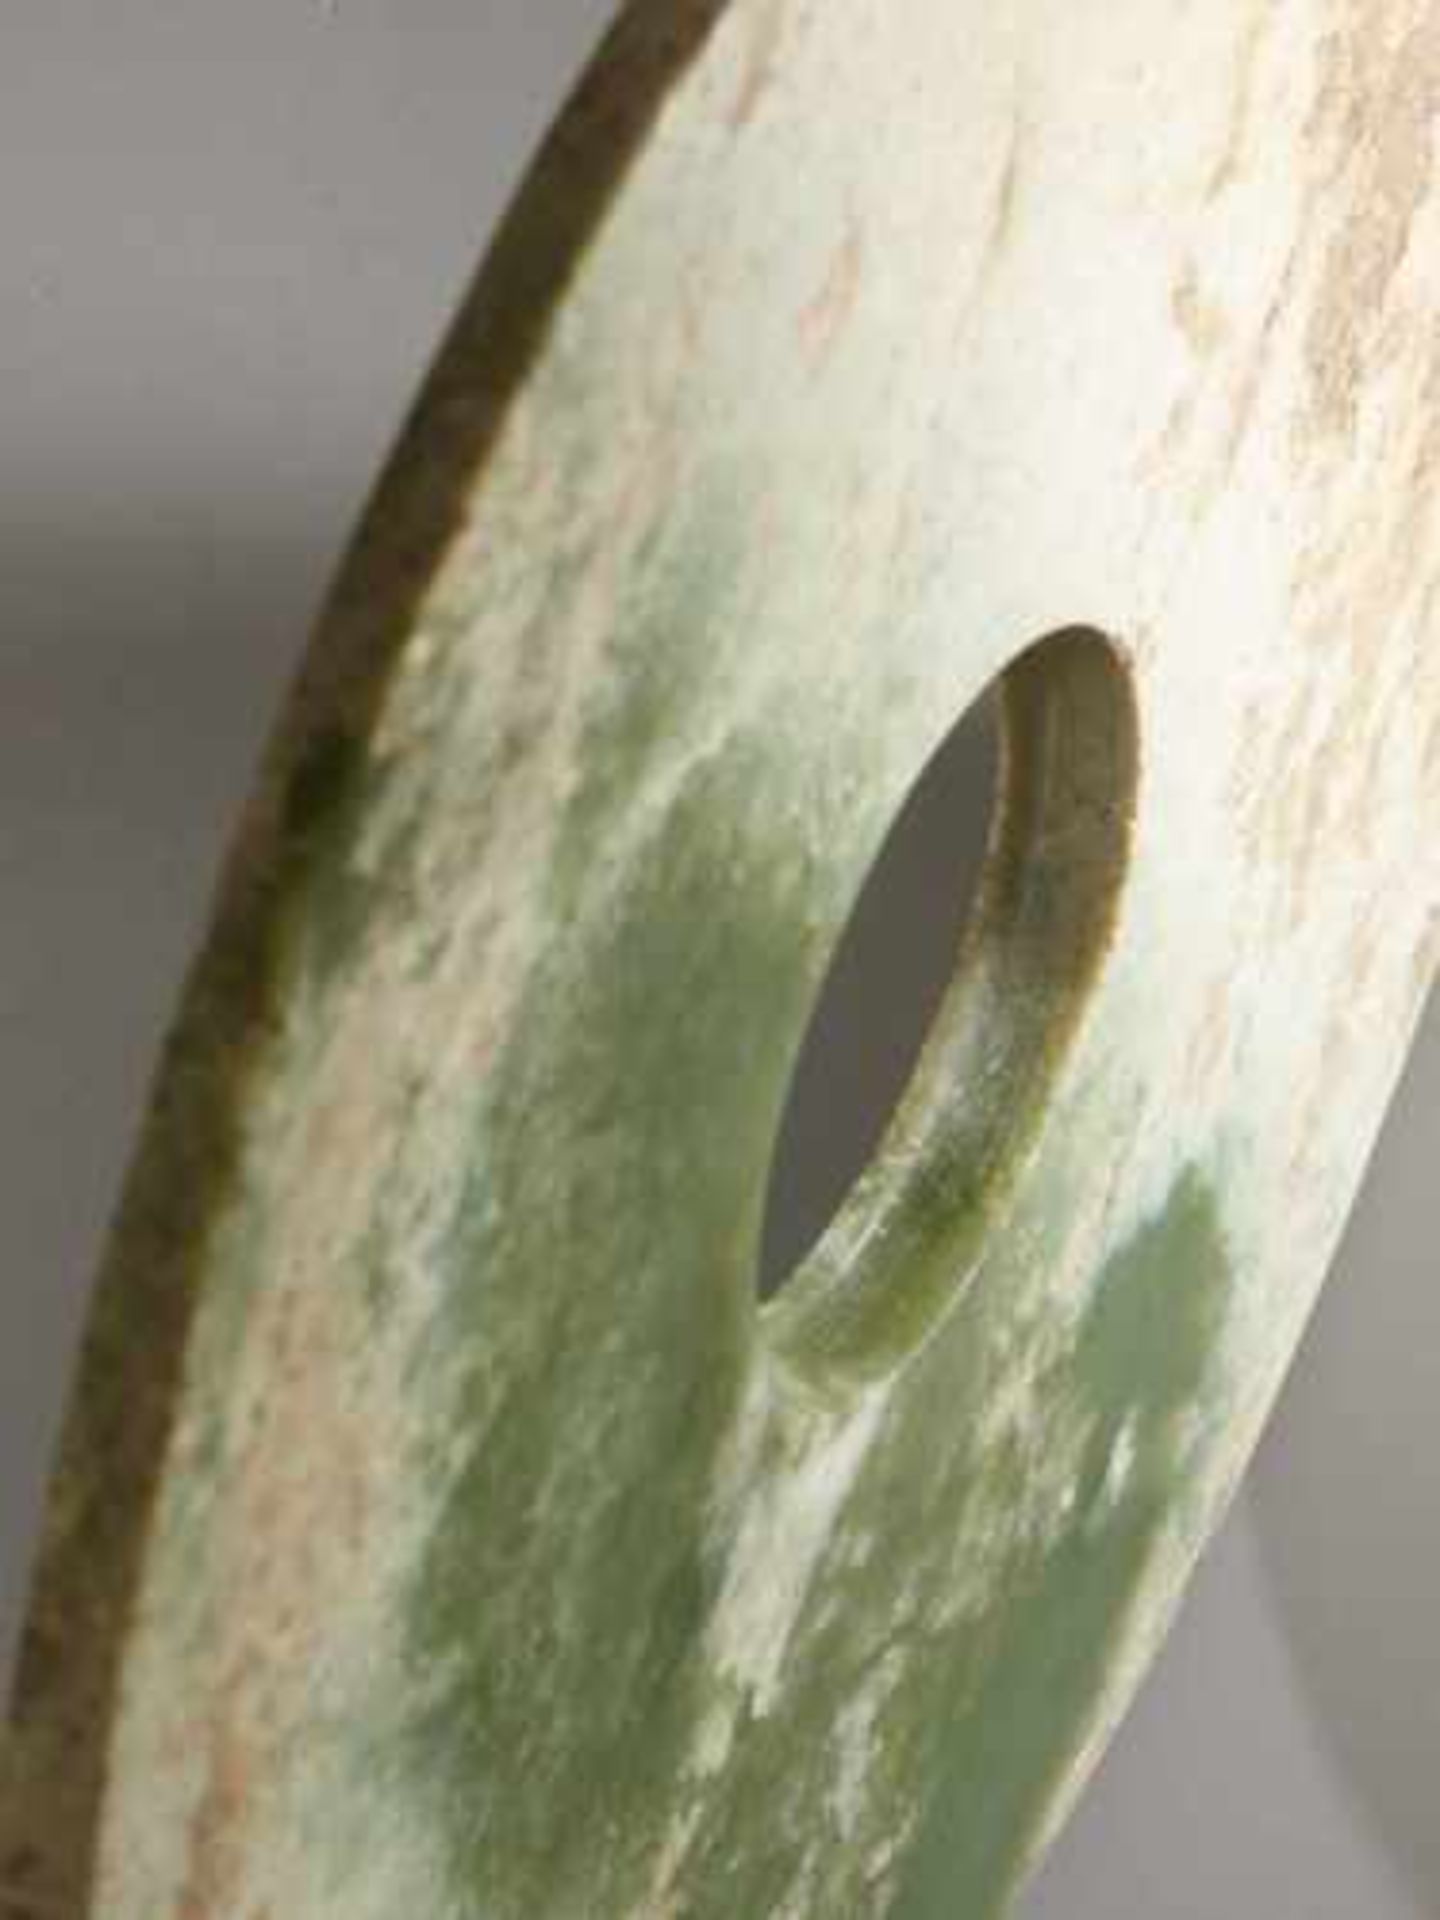 A LARGE SMOOTH BI DISC IN GREEN JADE WITH WHITENED AREAS Jade, China. Early Bronze Age, c. 2200-1600 - Image 3 of 7